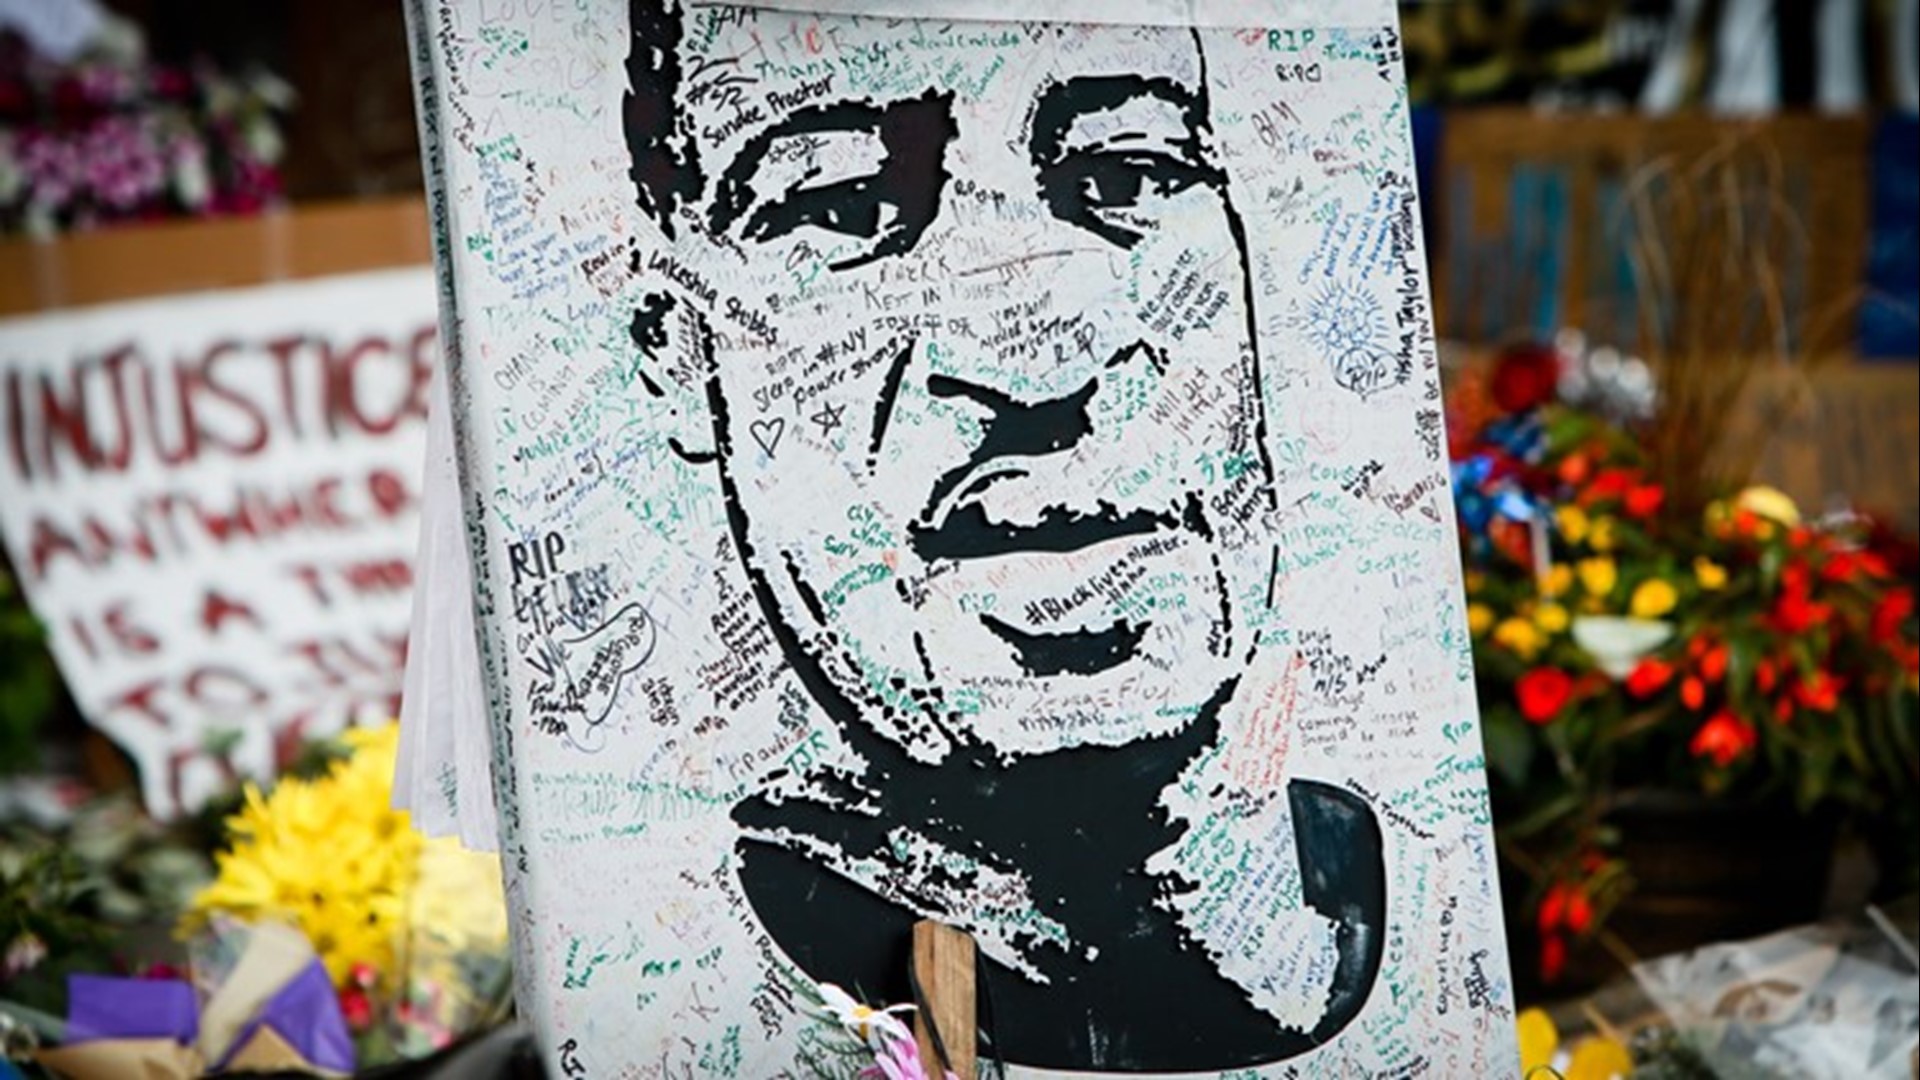 The words “I can’t breathe” became a national chorus for change in the midst of a racial reckoning following Floyd’s death.